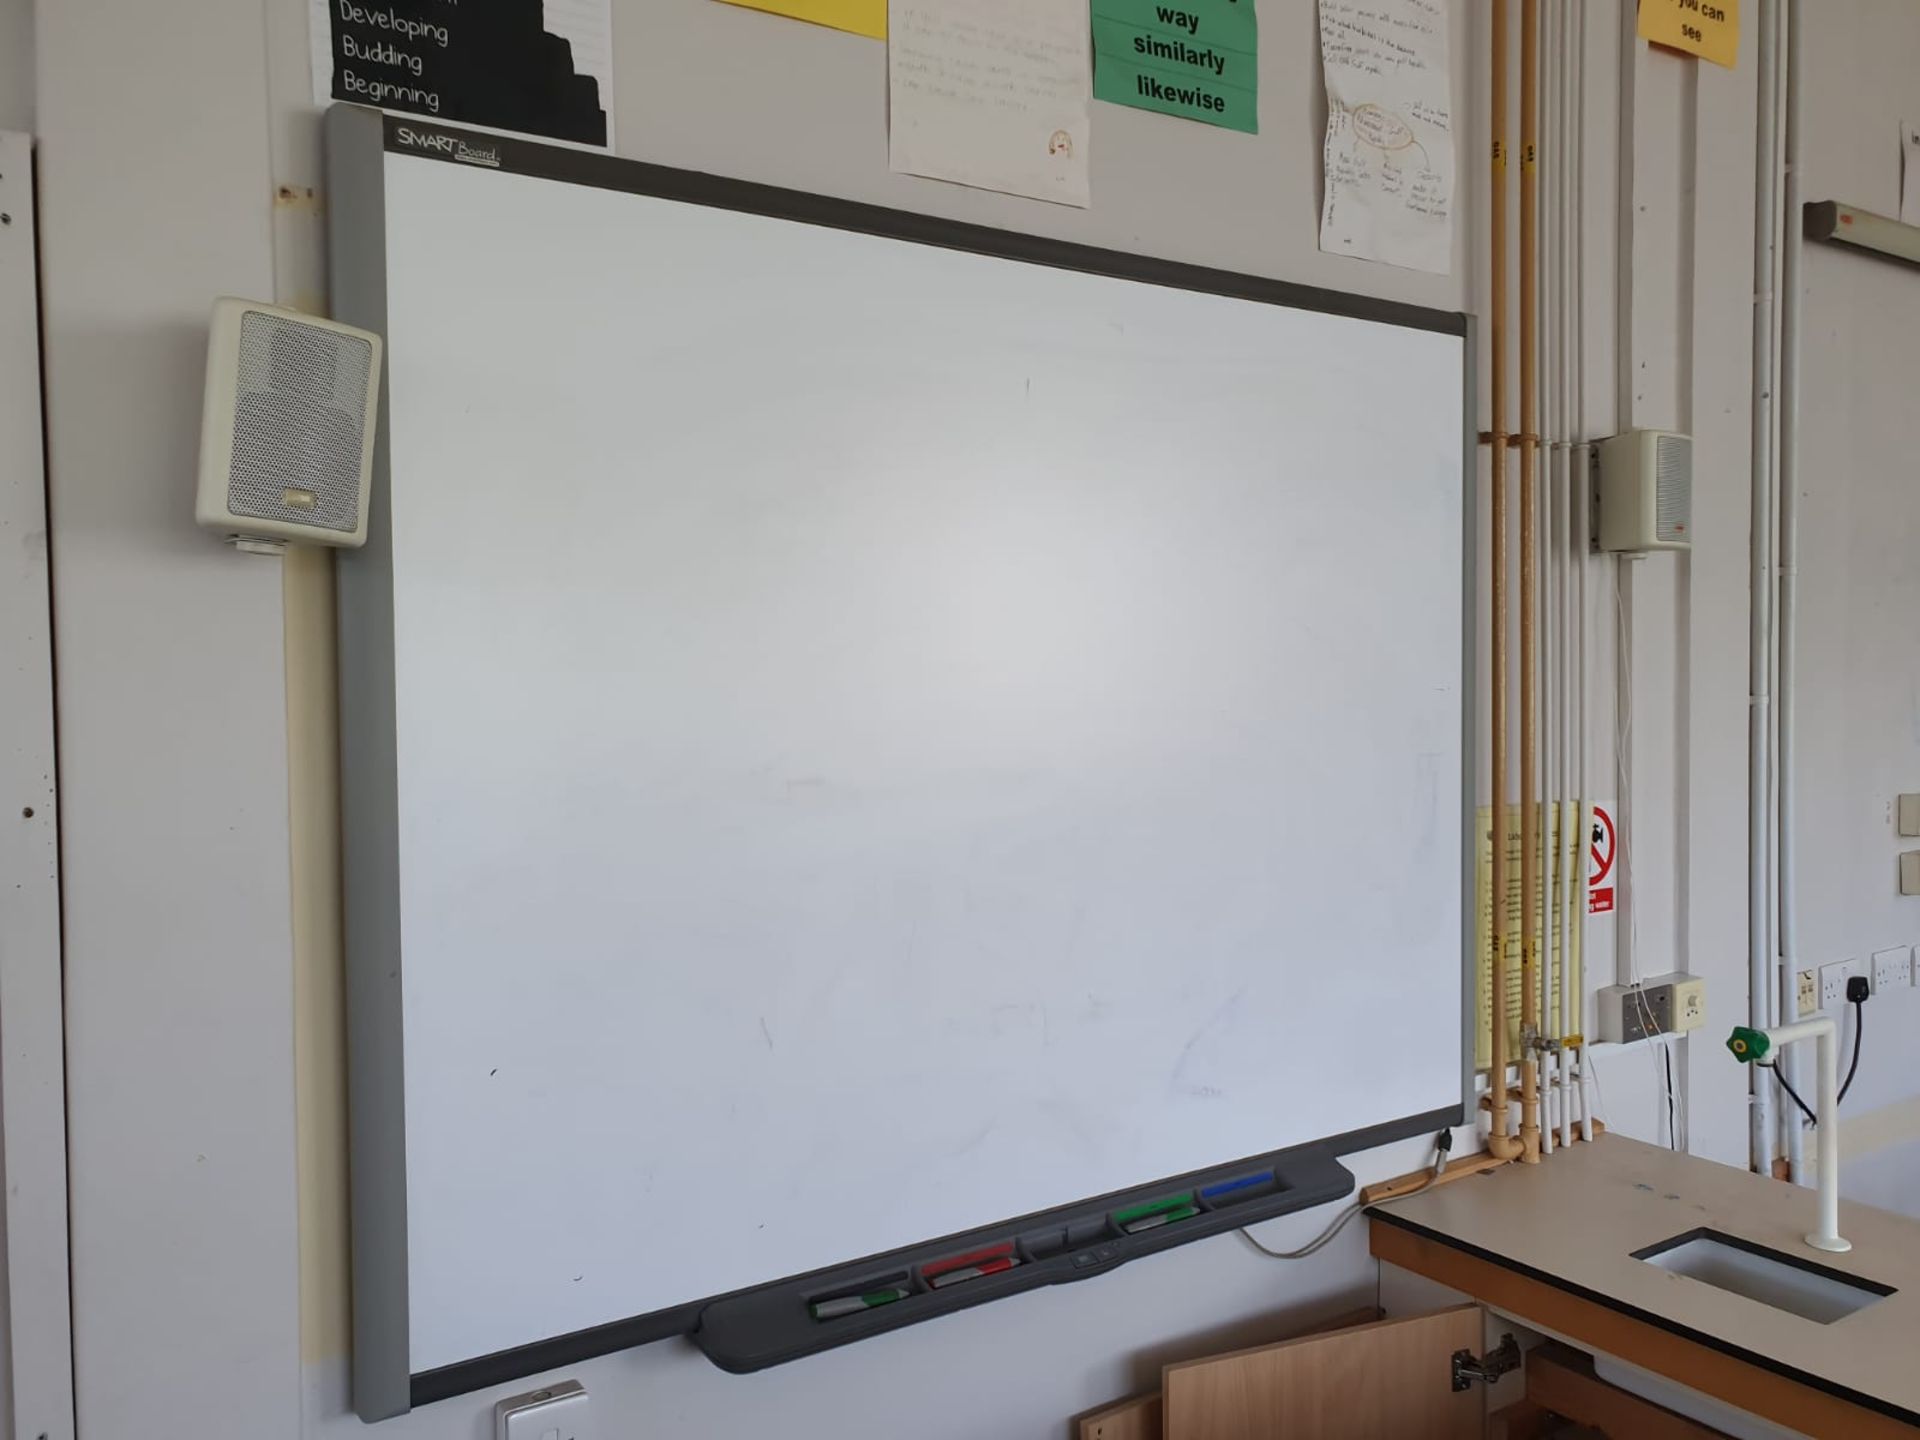 1 x Smart Interactive White Board With Speakers - Large Size -CL499 - Location: Borehamwood